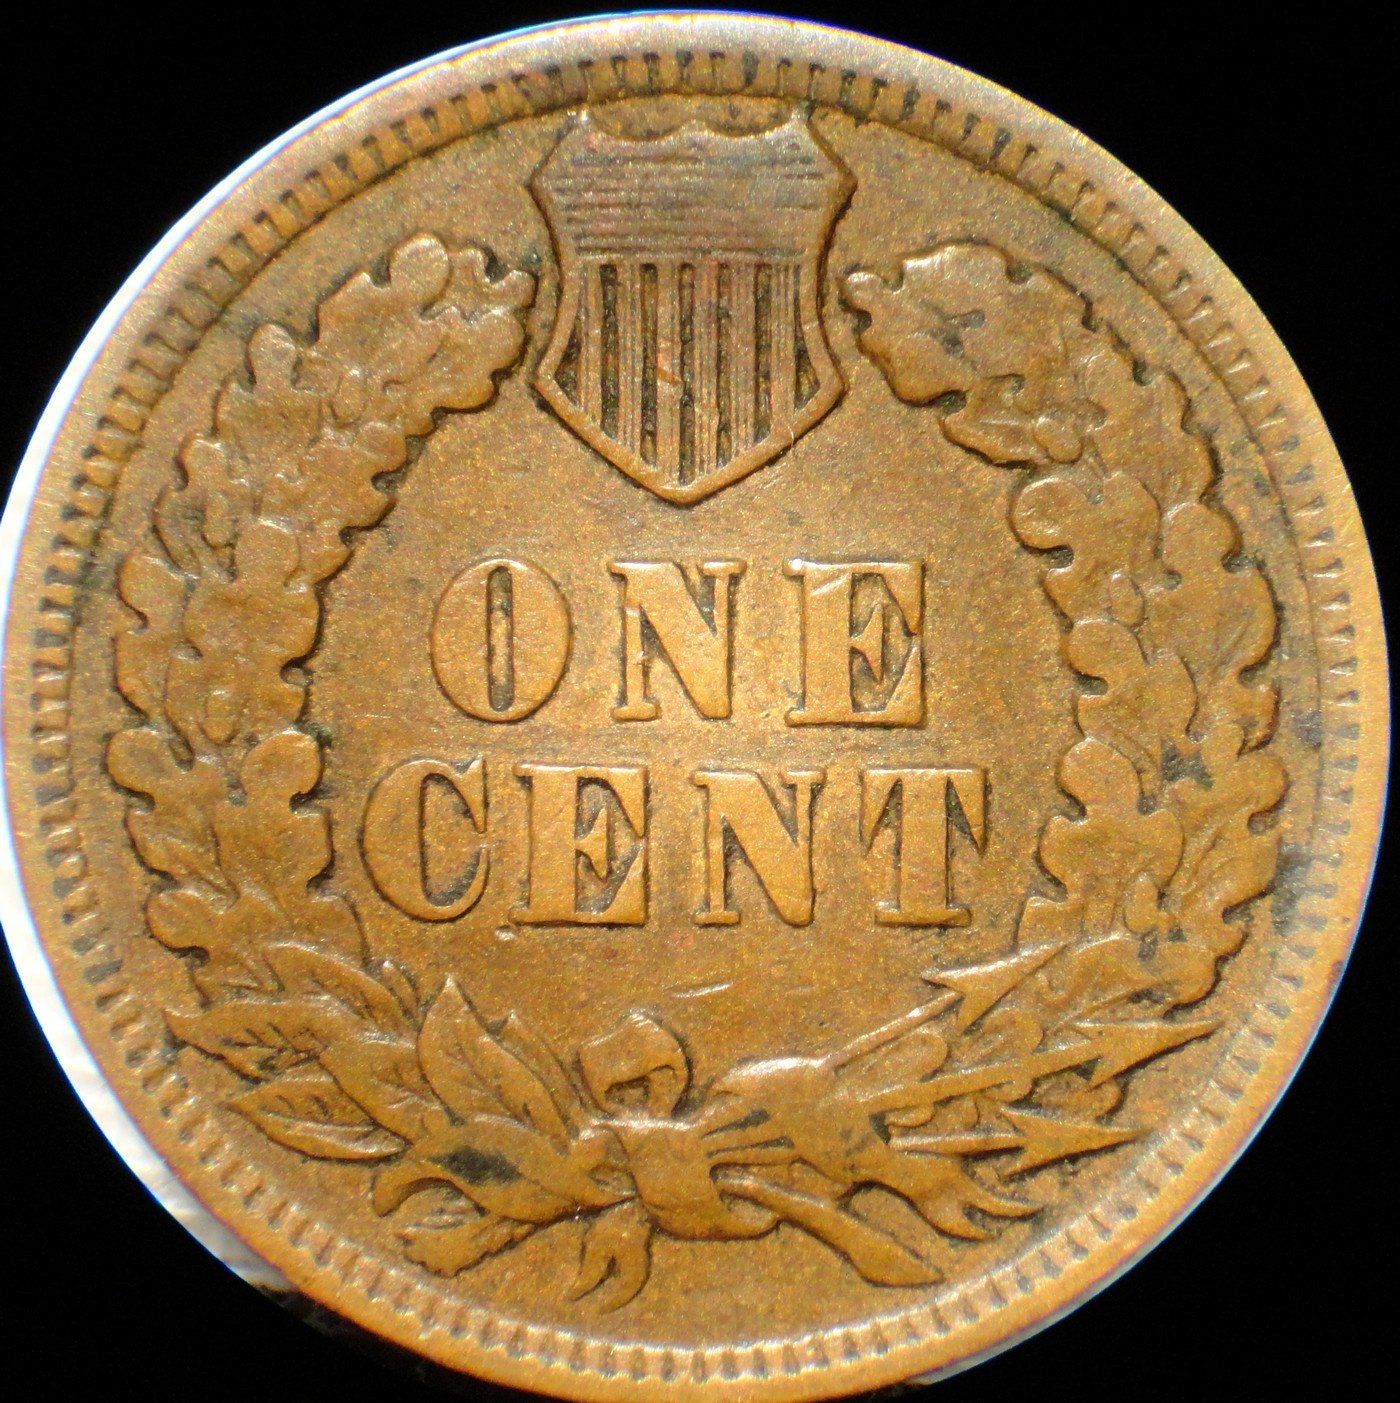 1904 Reverse of MPD-009 Indian Head Penny